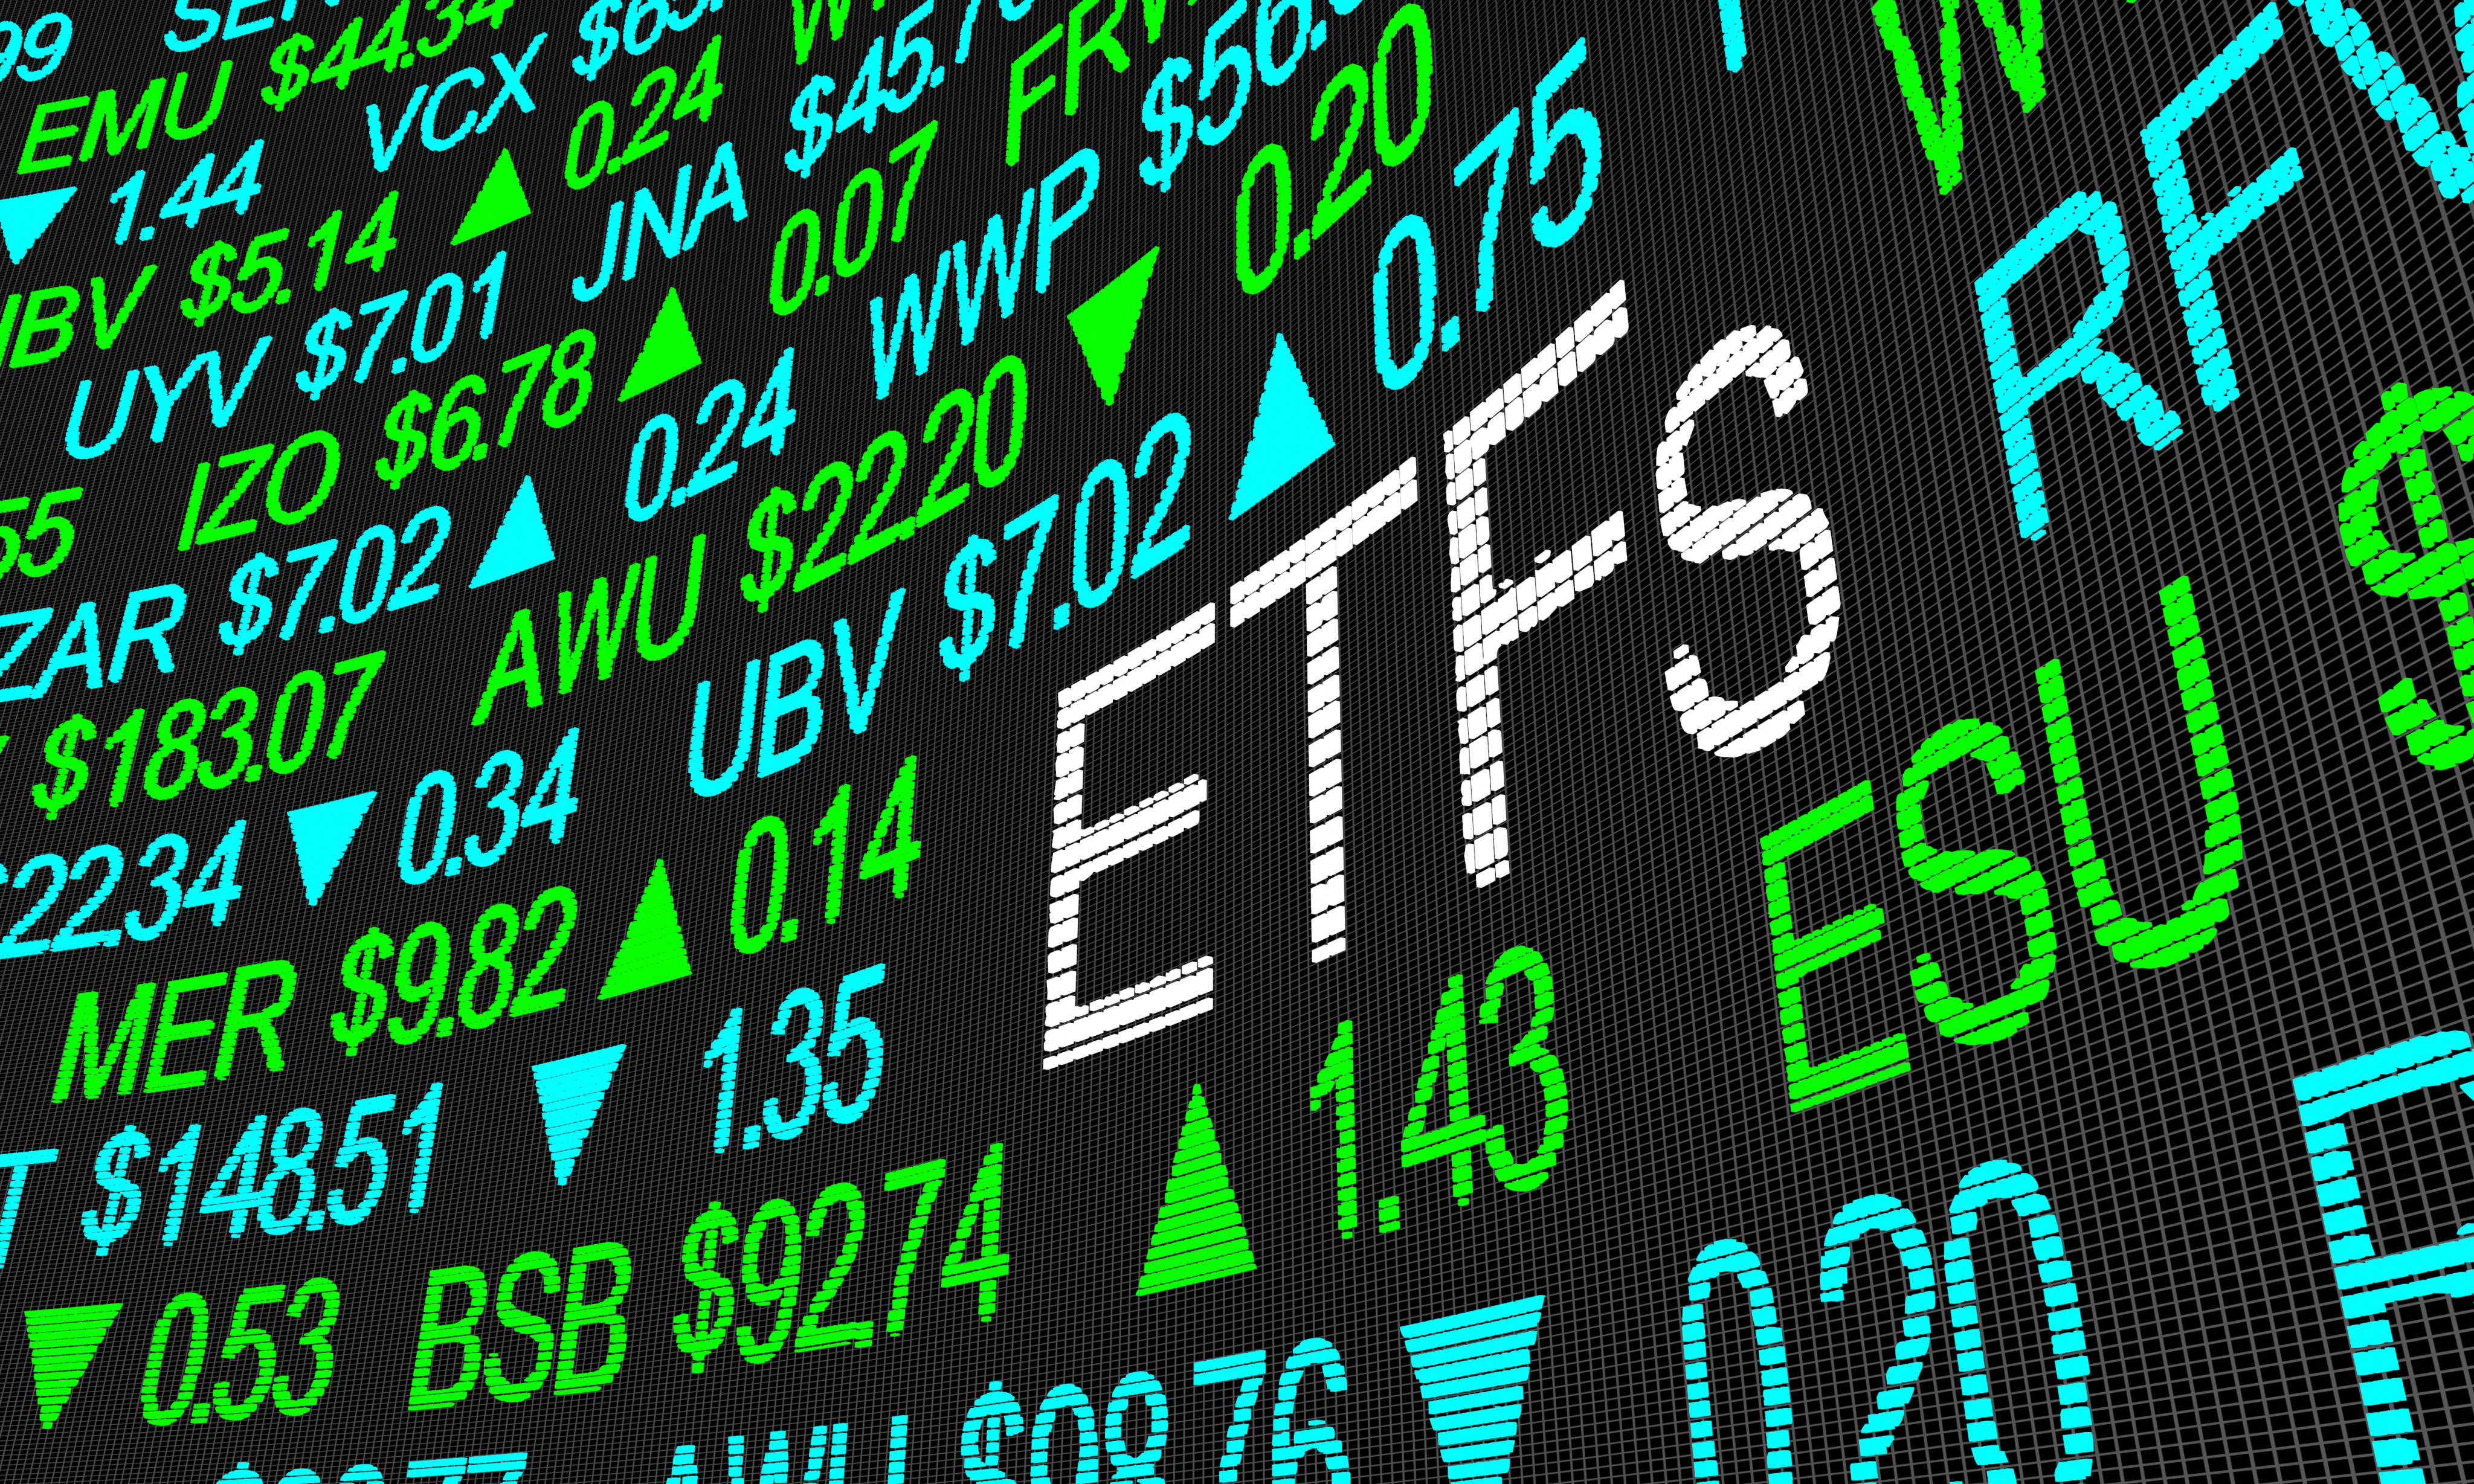 China’s sovereign wealth fund has bought ETFs in a bid to support the struggling equity market. Photo: Shutterstock